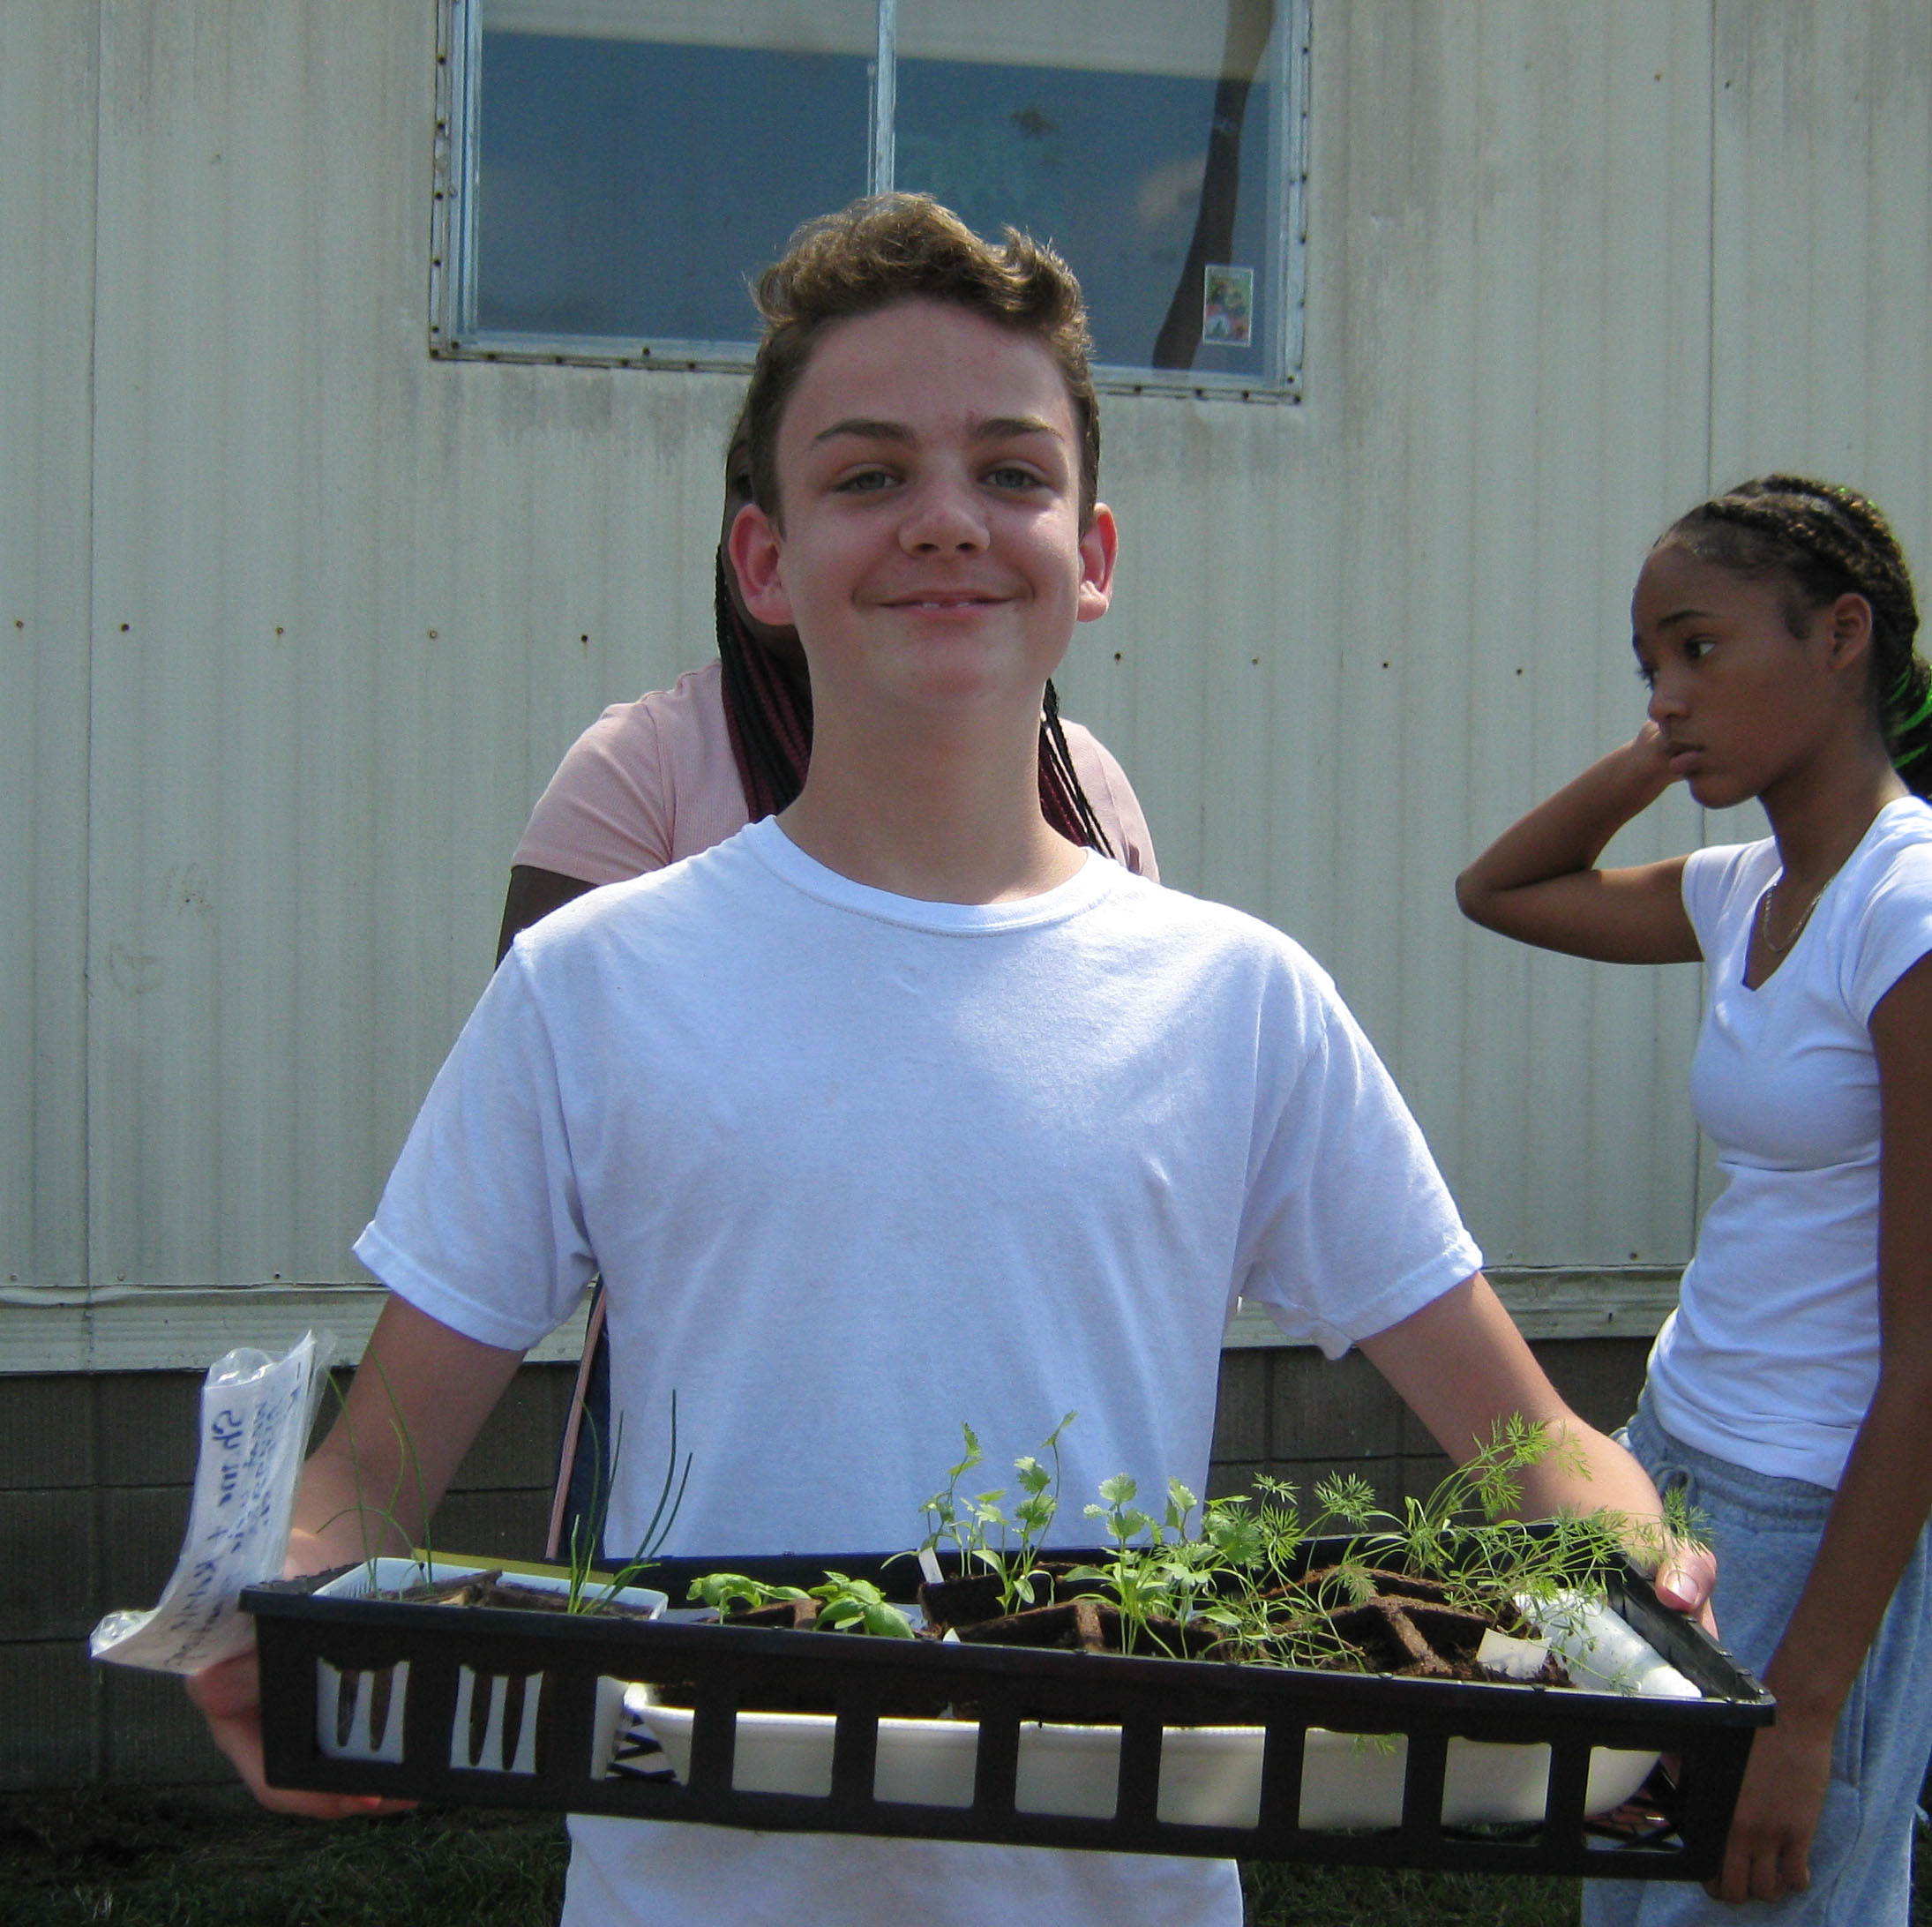 For many students, this is their first experience with gardening of any kind, and their teachers say that they are thrilled and excited to see the transformation as their plants grow.